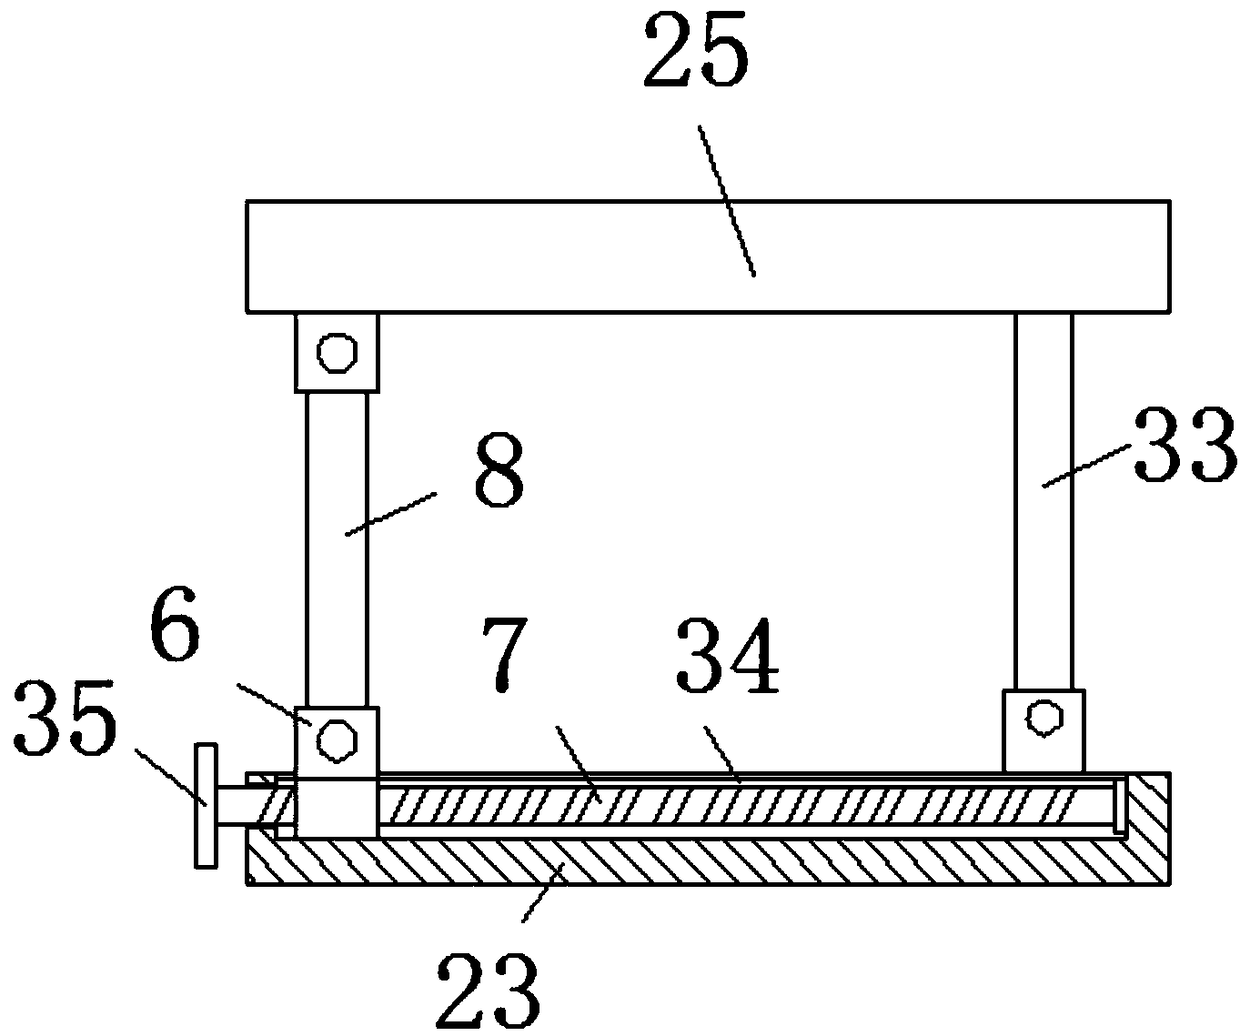 Supporting platform for frequency converter assembly